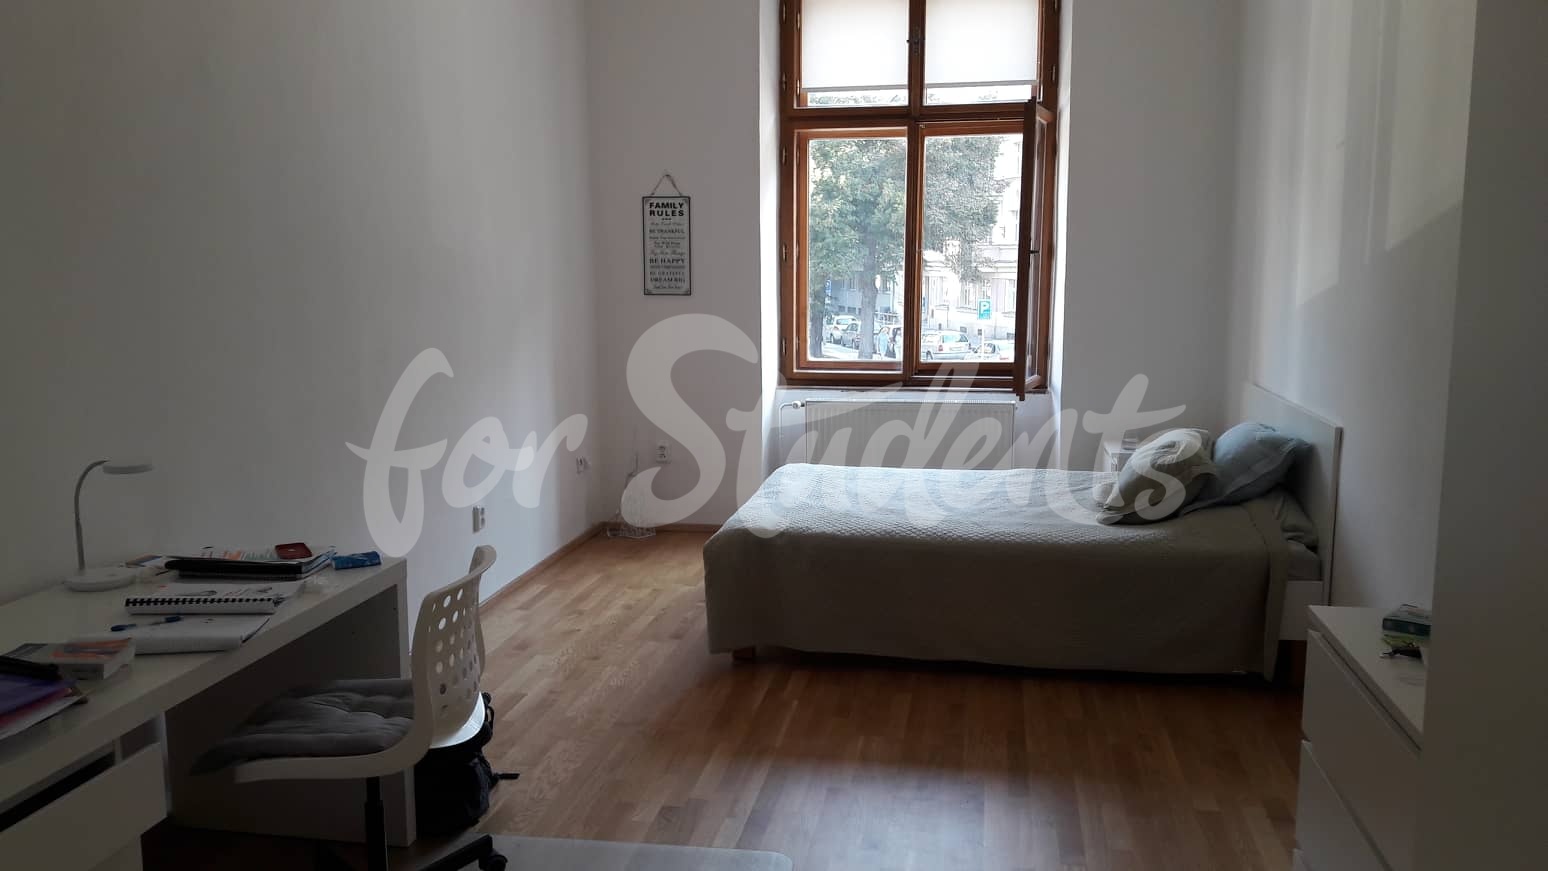 One room available in female two bedroom apartment in student´s house near the Old Town, Hradec Králové